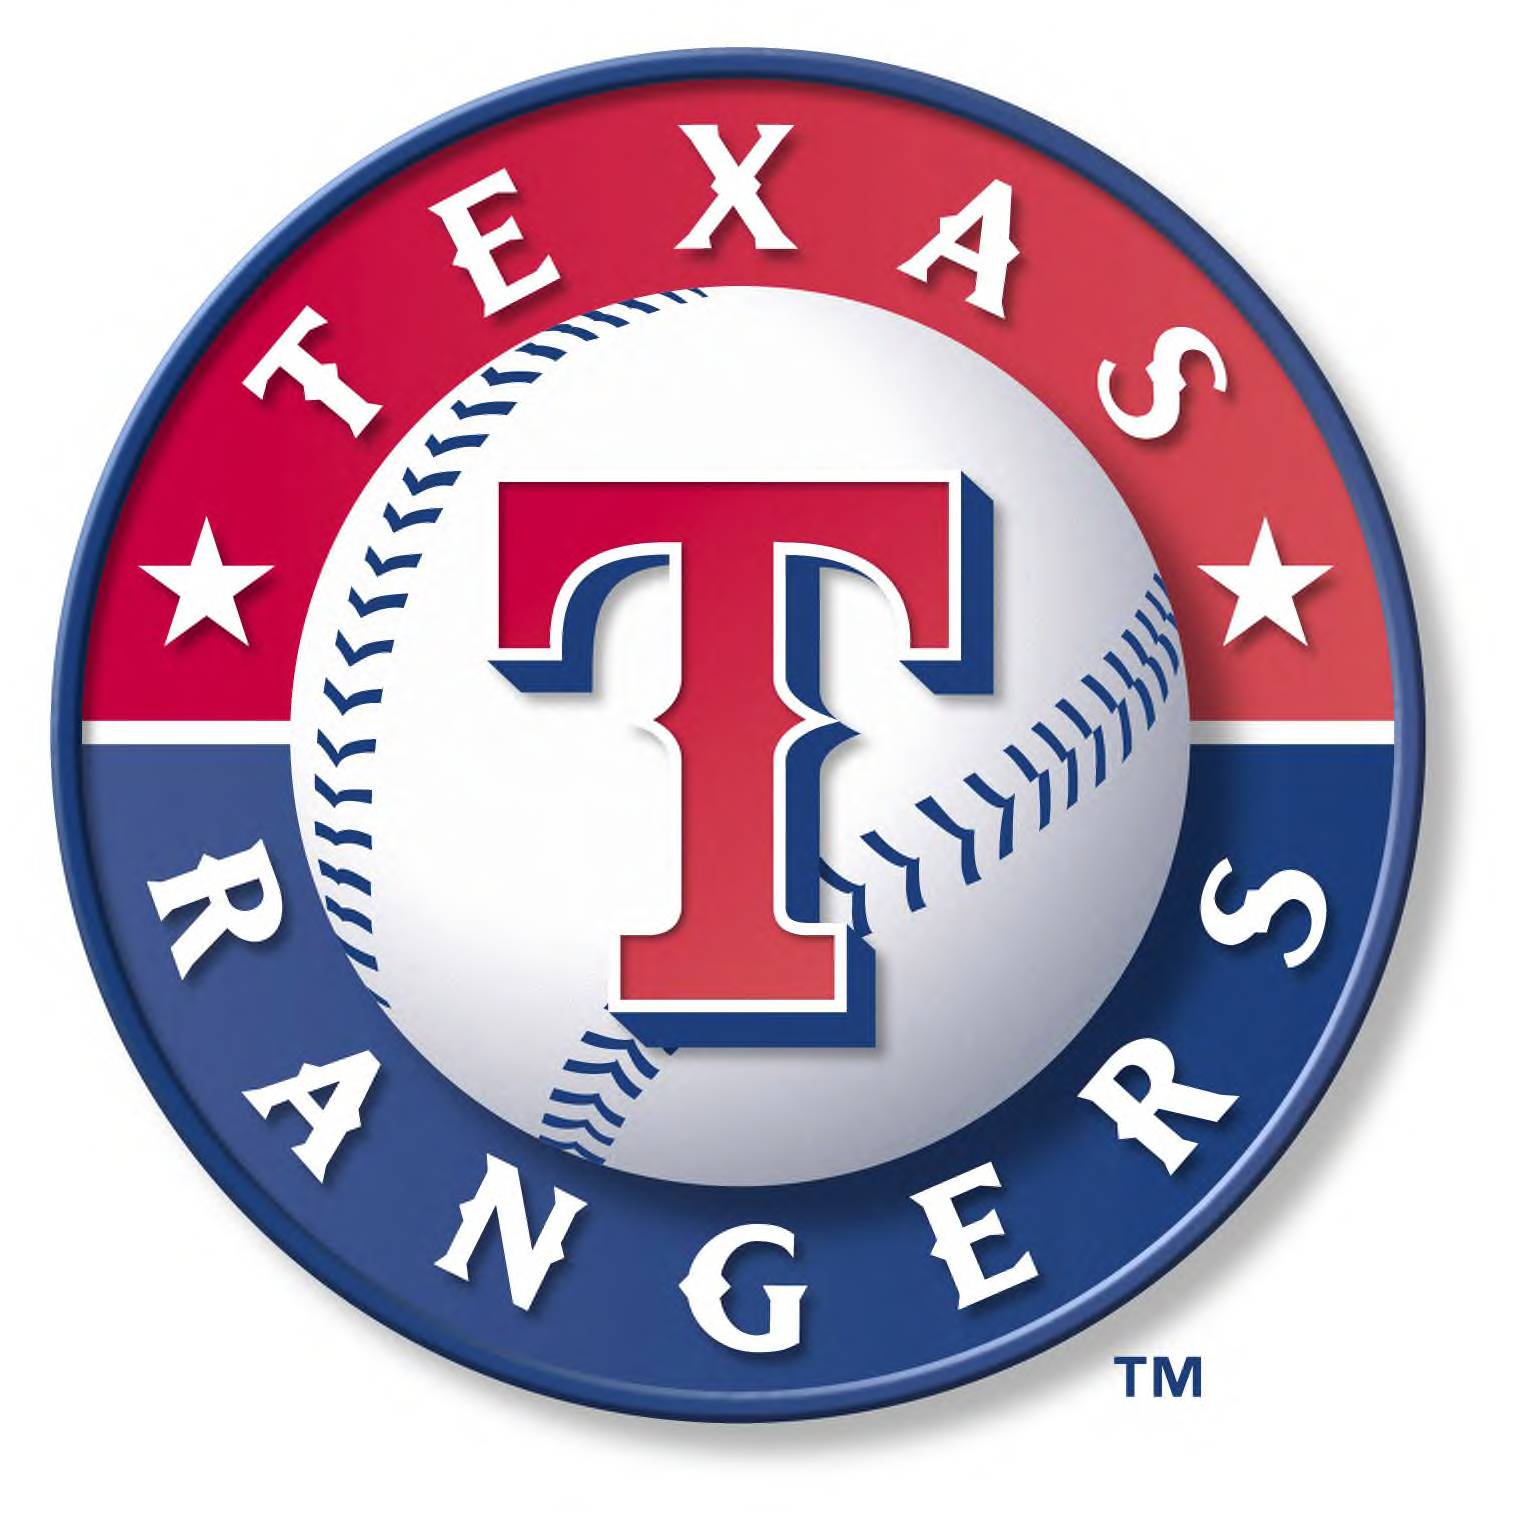 The Nightly Daily Rangers still team to beat in the American League